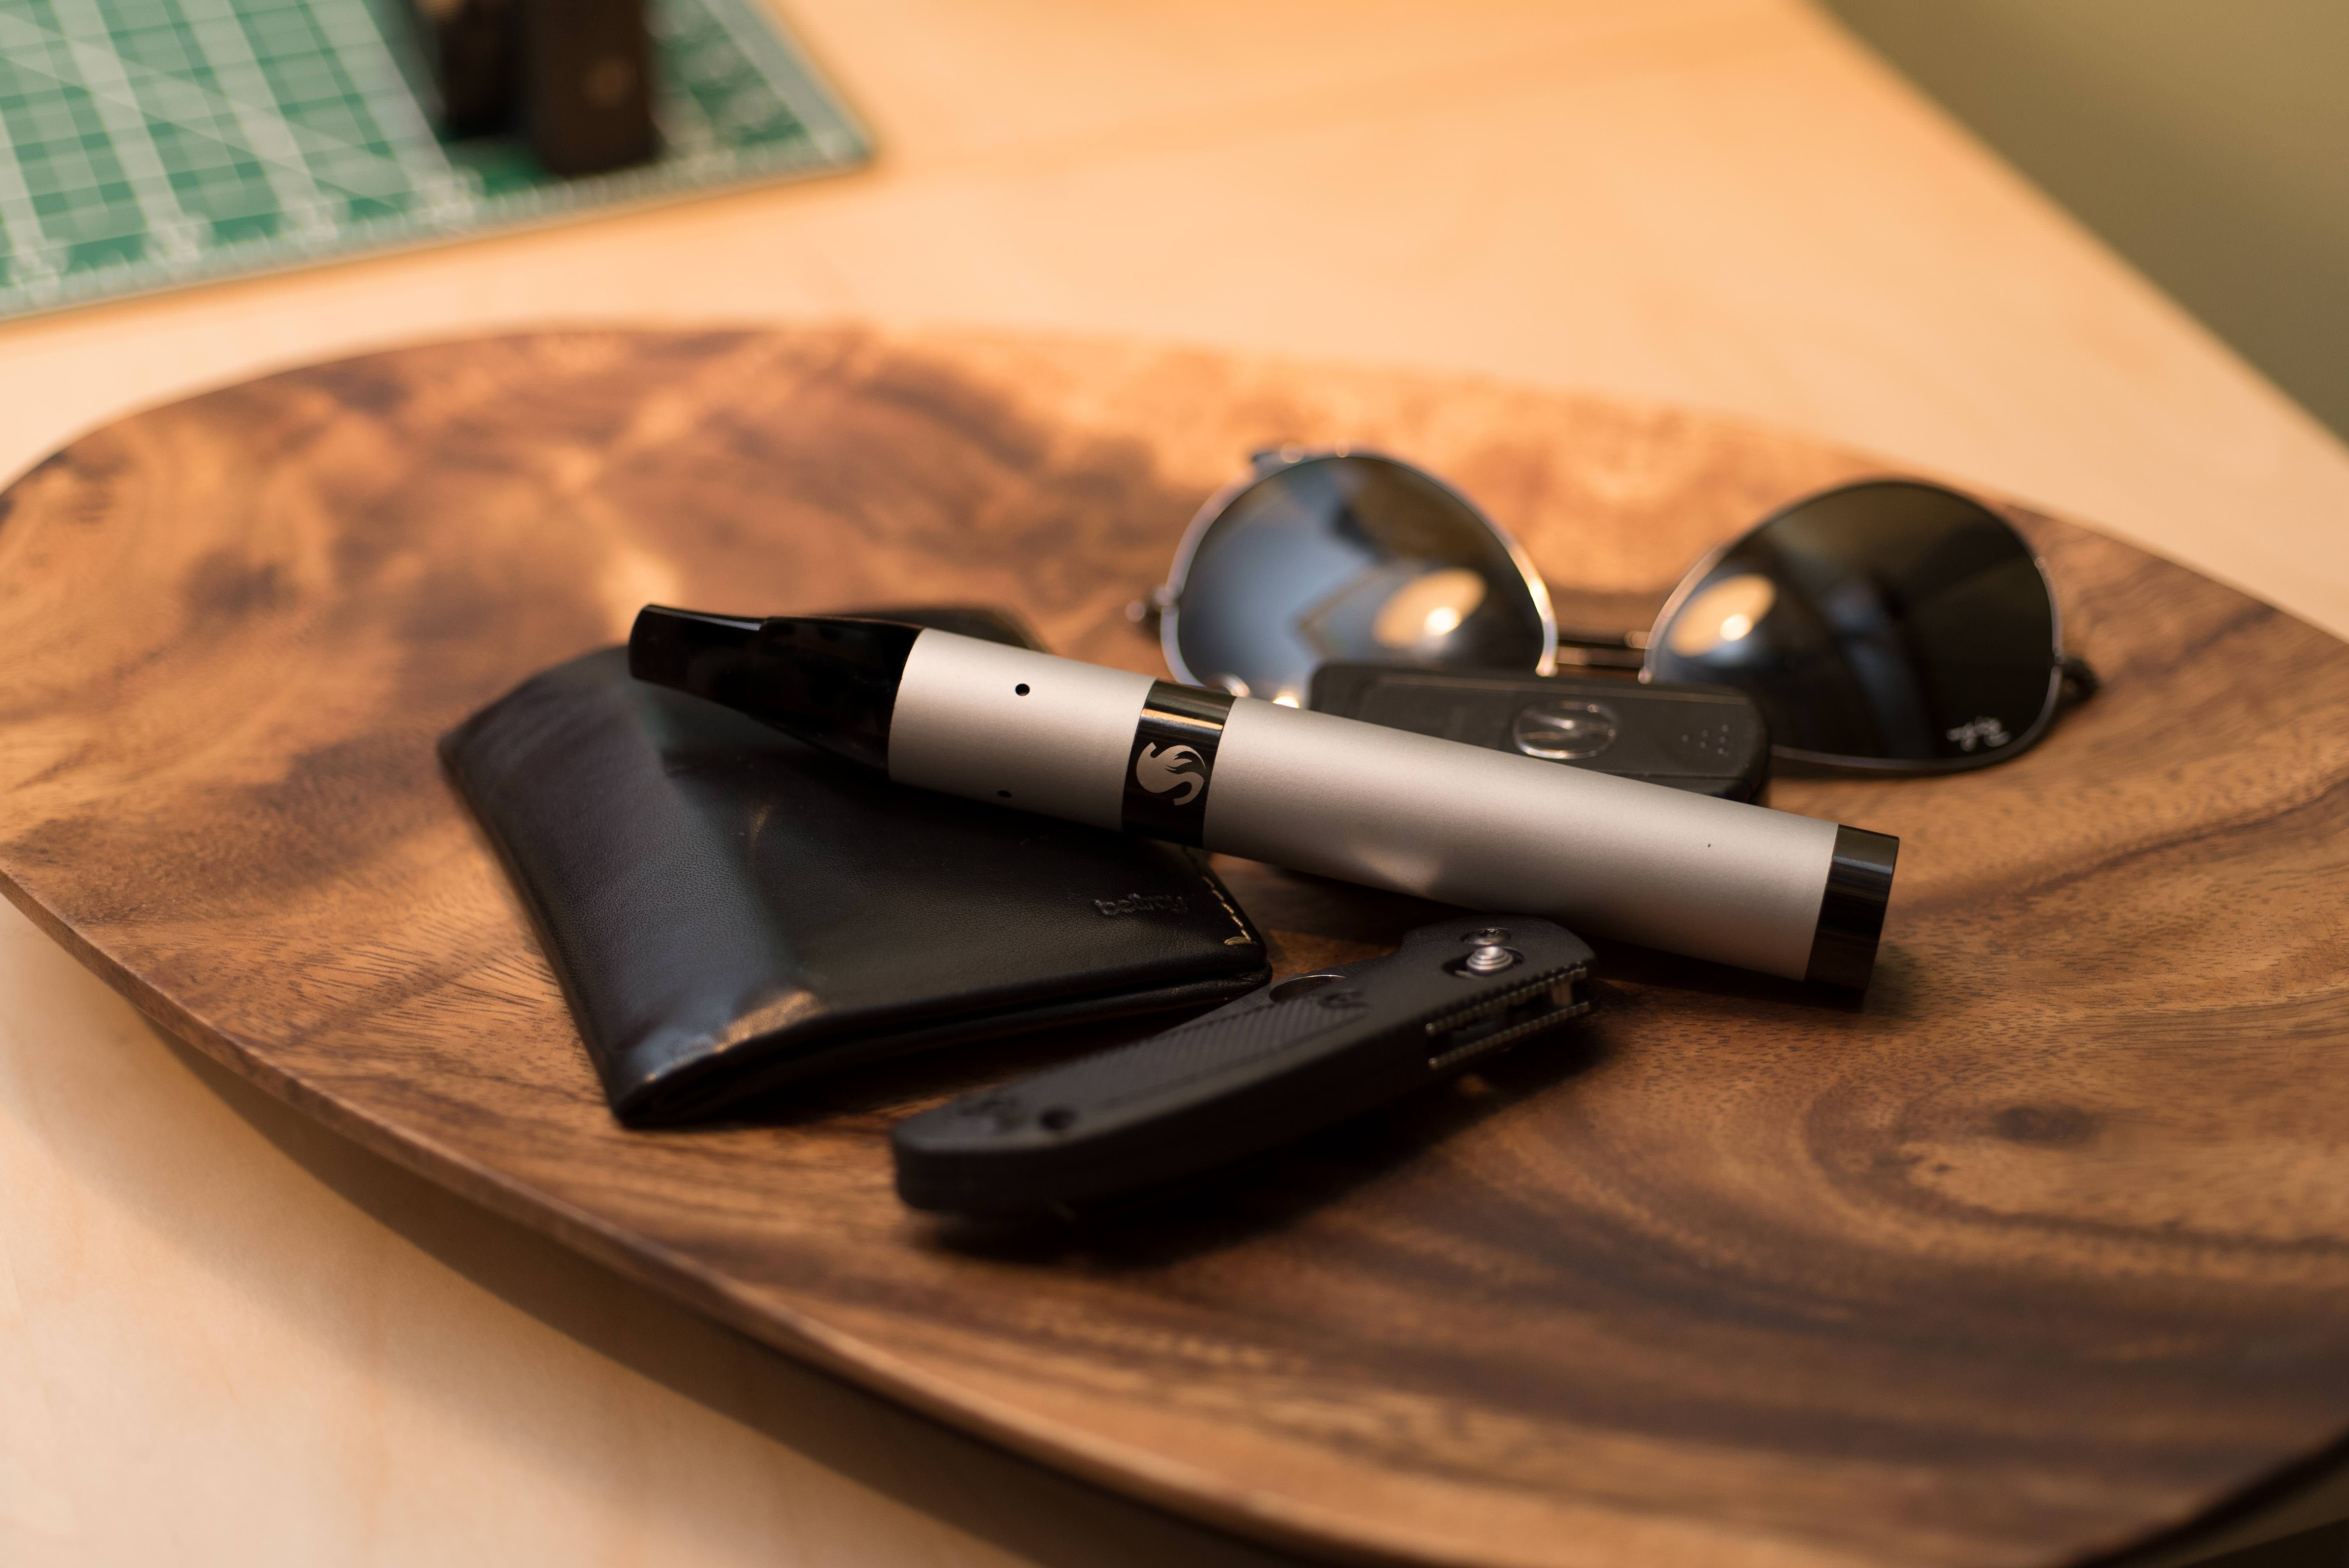 Source Ghost Portable Vaporizer Review